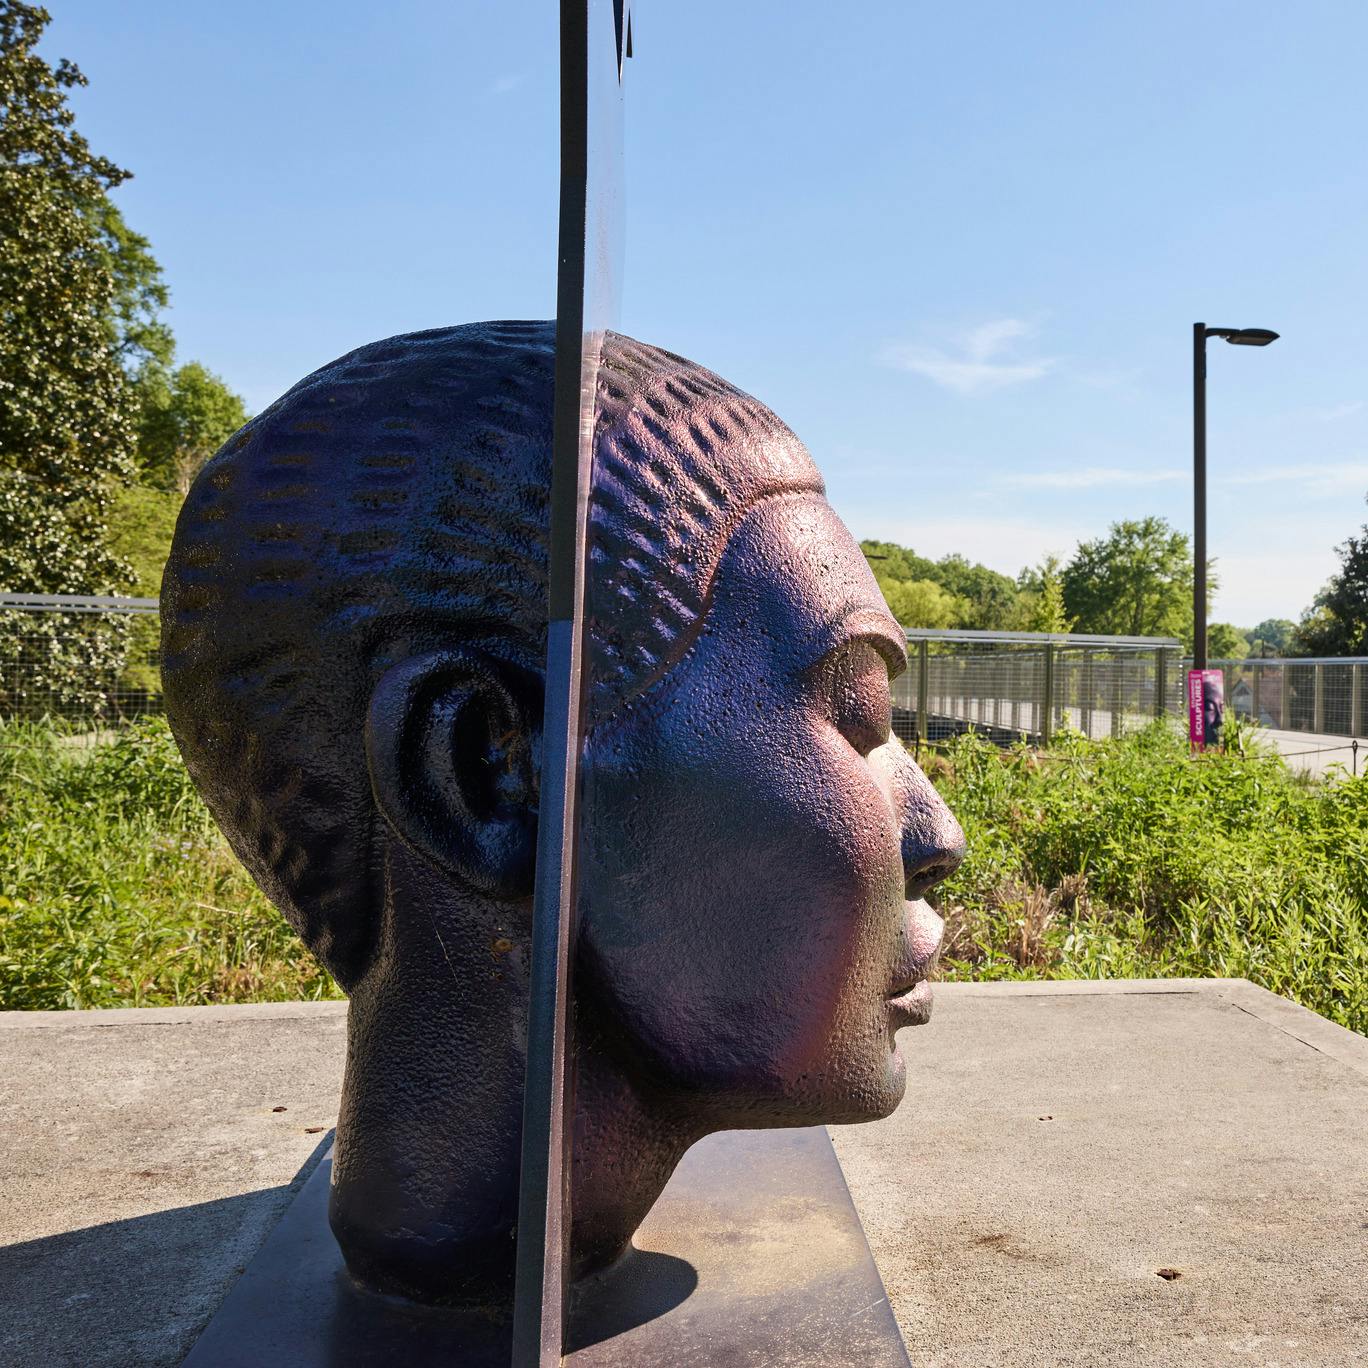 A sculpture of a person's head.